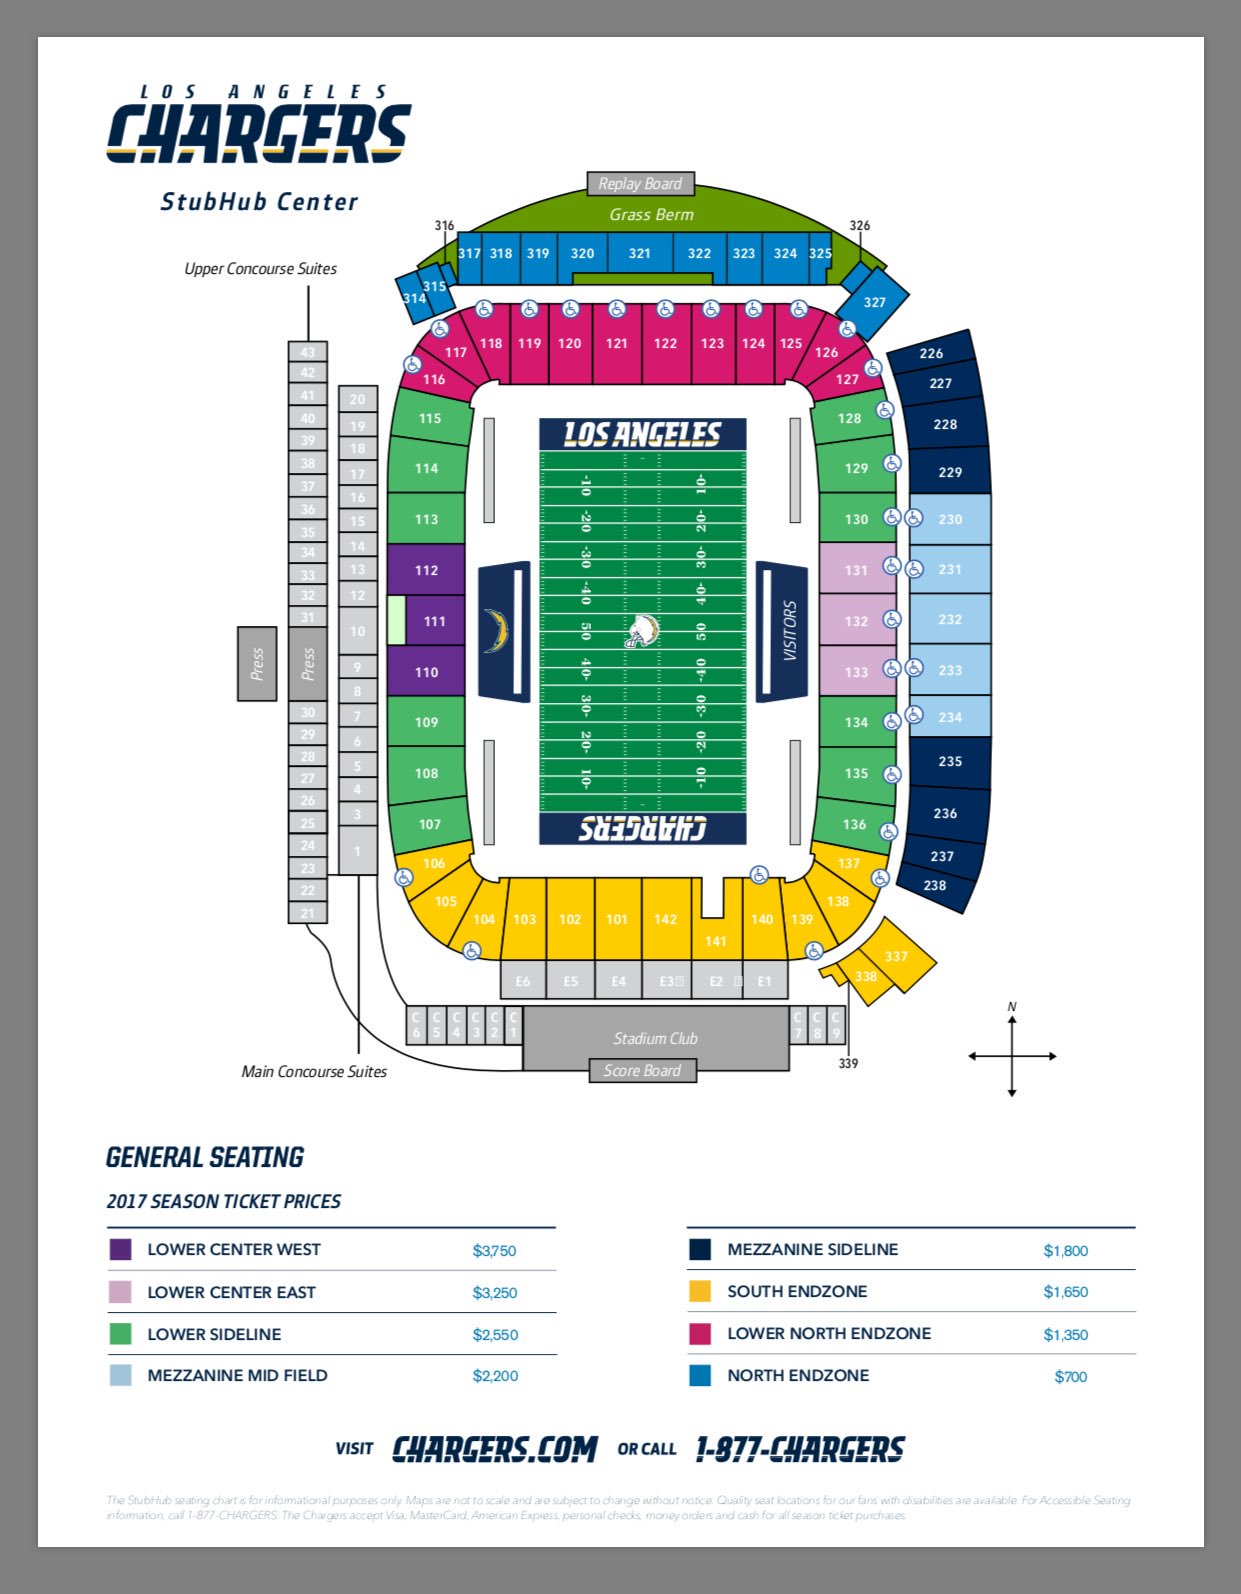 los angeles chargers game tickets